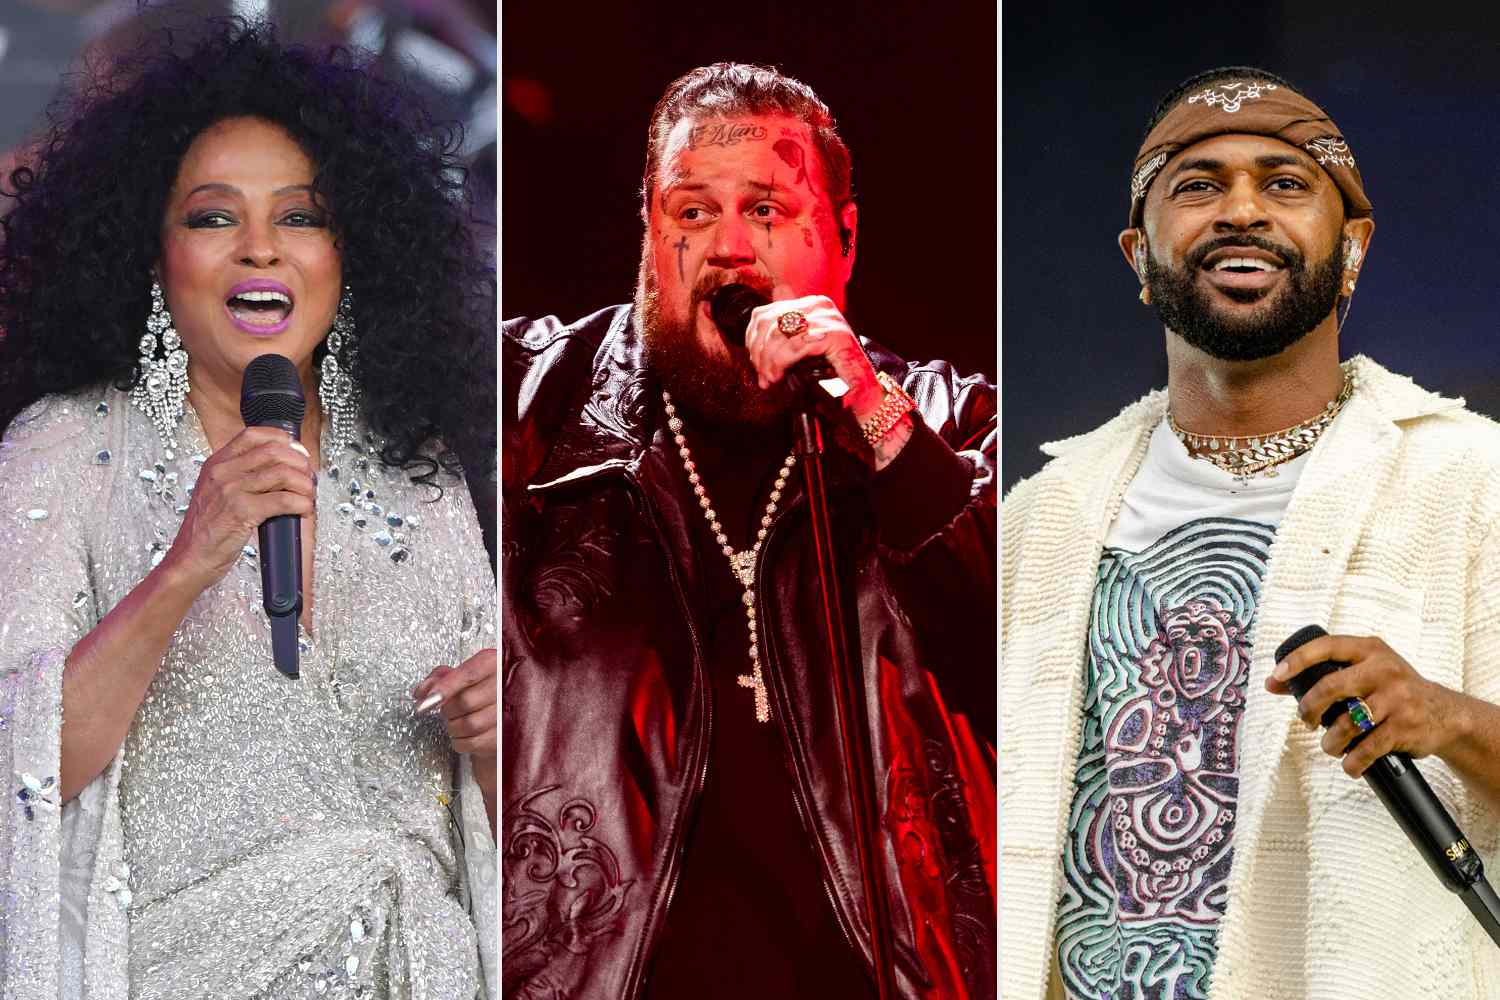 Diana Ross, Jelly Roll, Big Sean and More Lead Live From Detroit's All-Star Concert Lineup